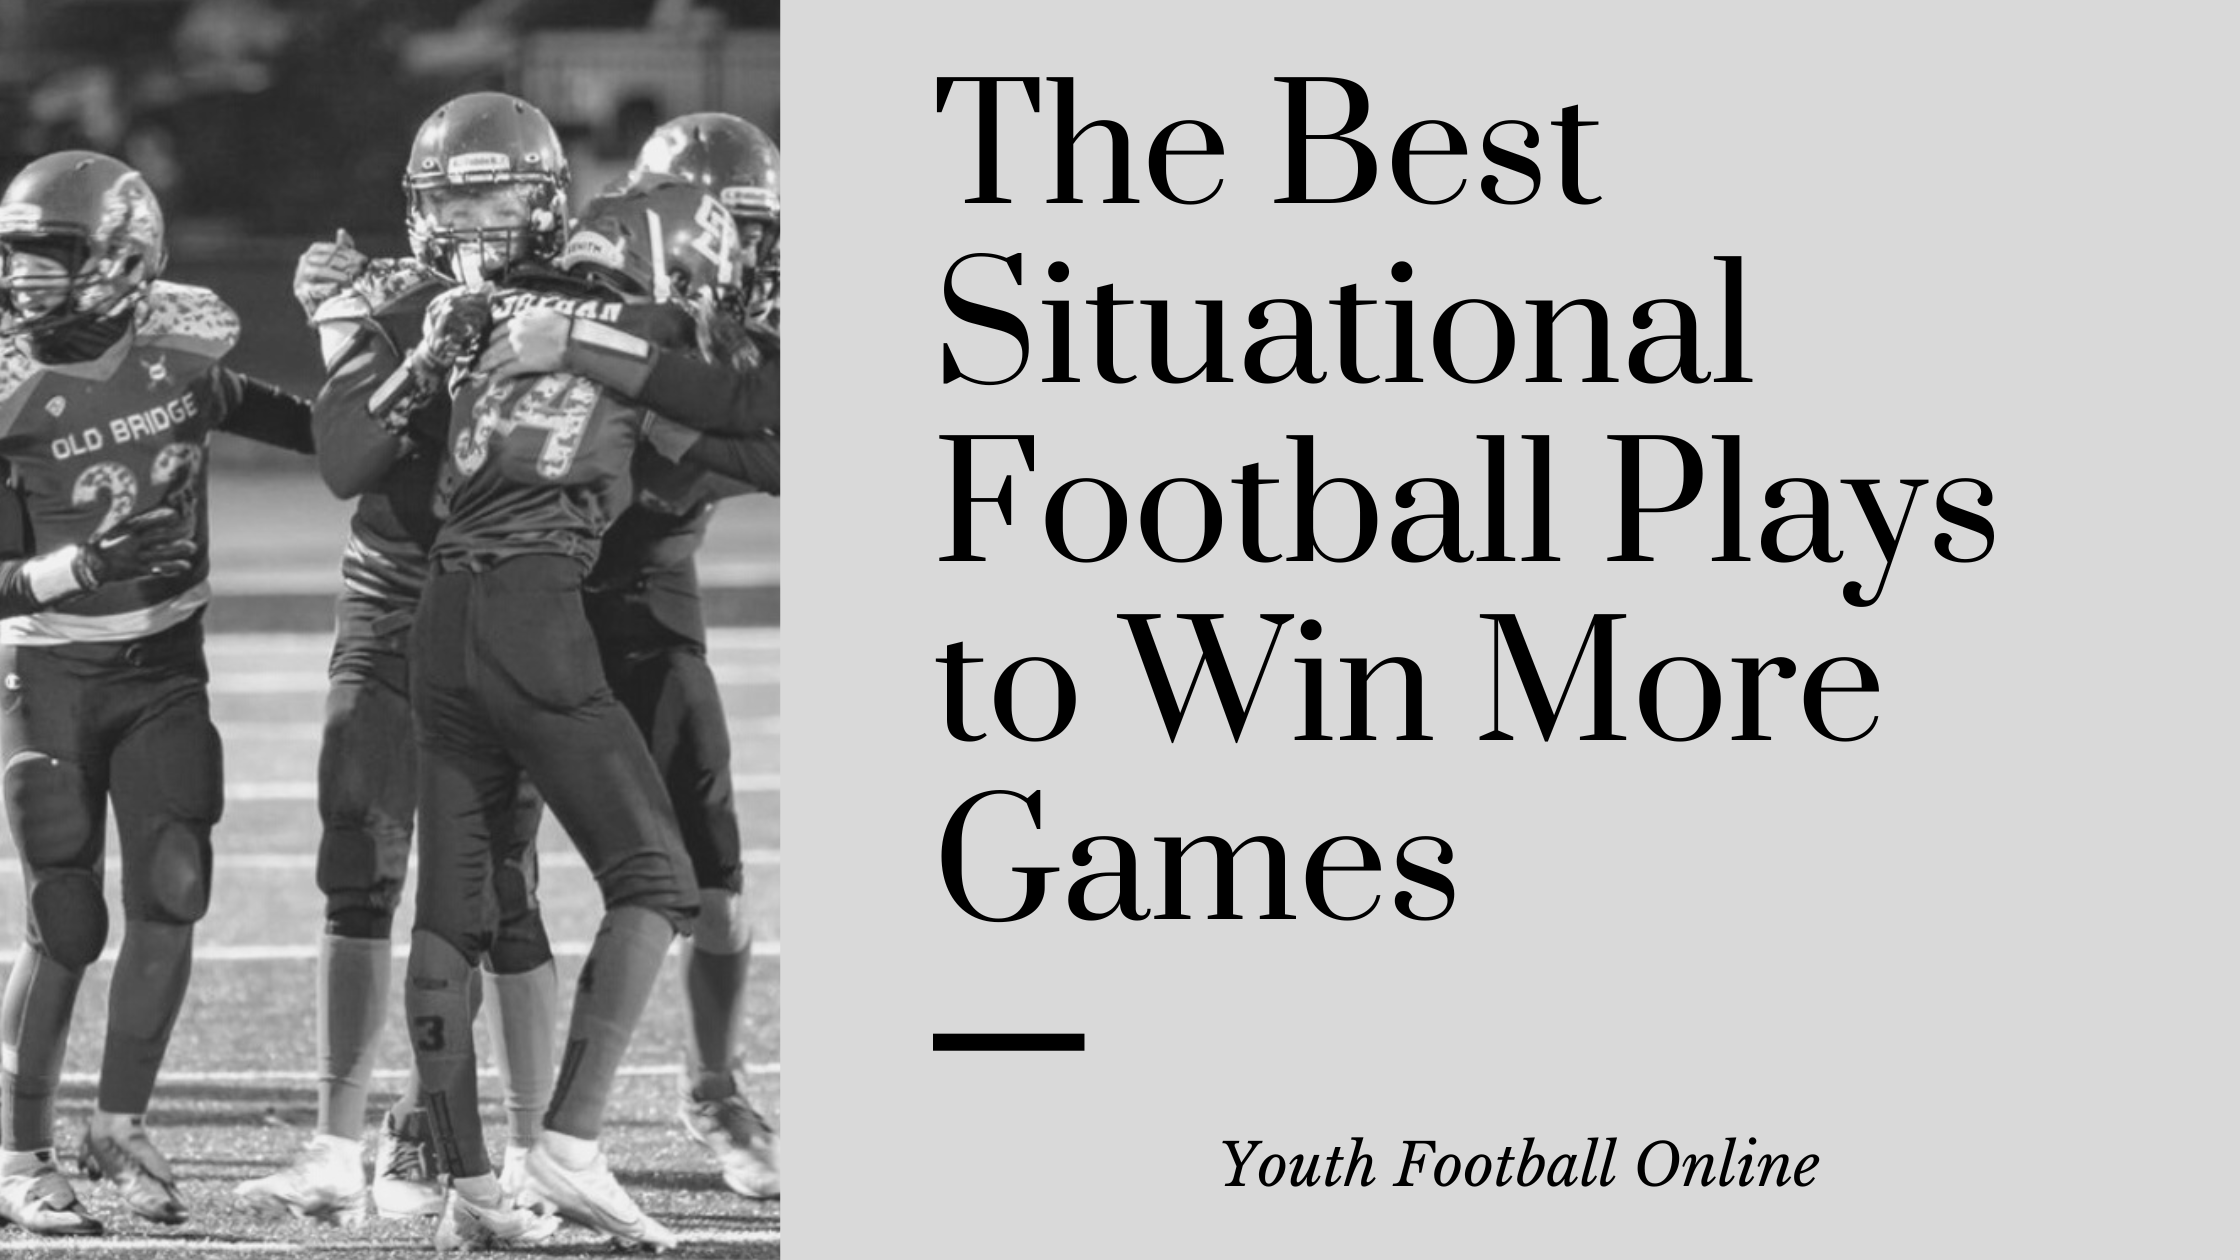 The Best Situational Football Plays to Win More Games